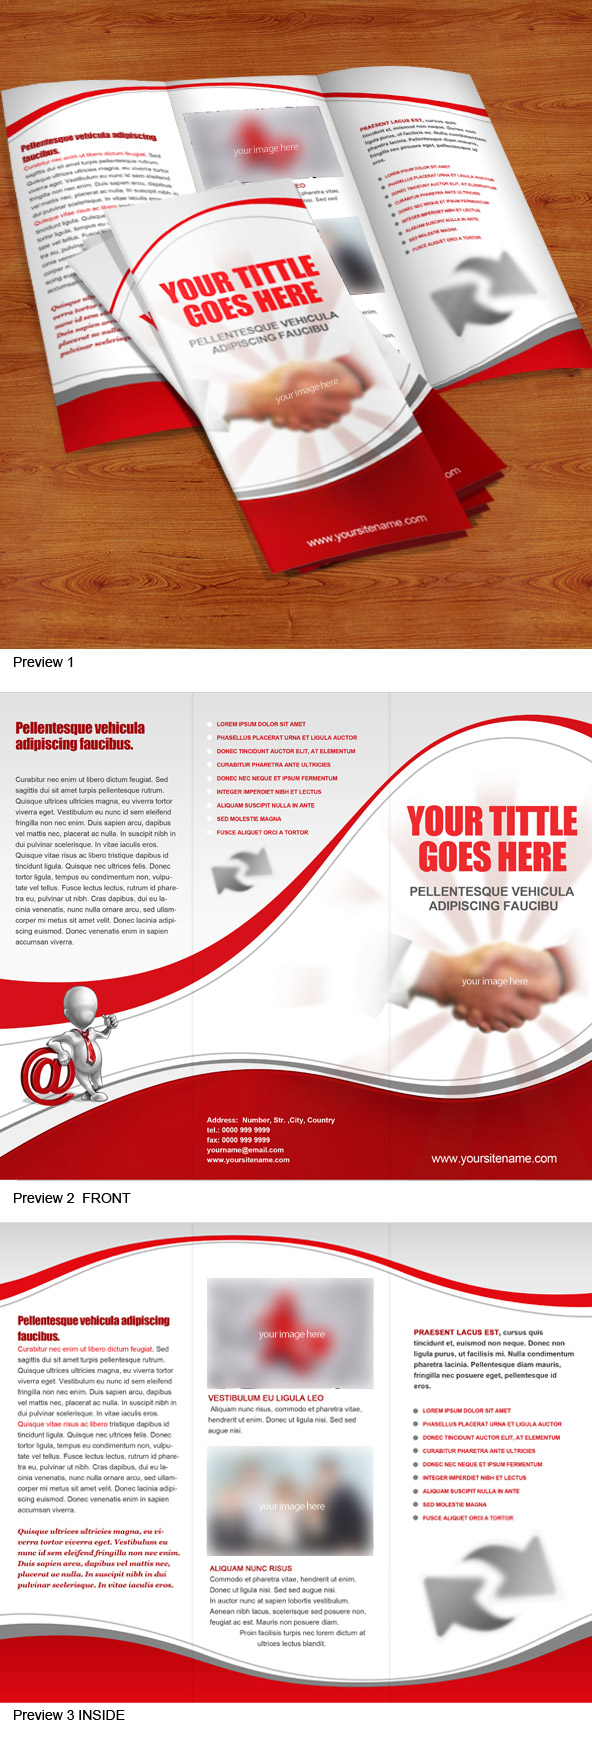 Free PSD 3 Fold Brochure Preview Big